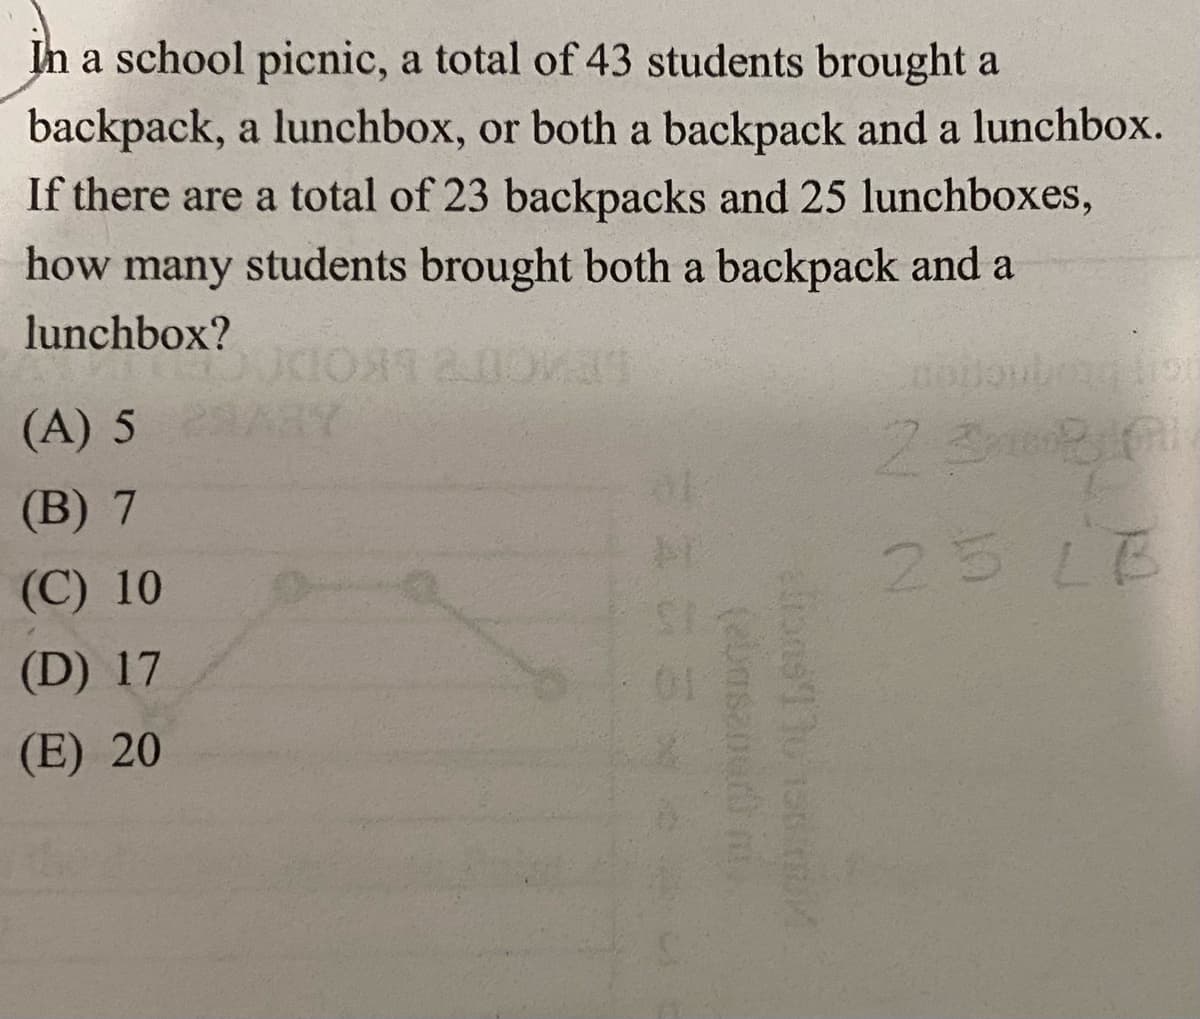 In a school picnic, a total of 43 students brought a
backpack, a lunchbox, or both a backpack and a lunchbox.
If there are a total of 23 backpacks and 25 lunchboxes,
how many students brought both a backpack and a
lunchbox?
(A) 5 297
(B) 7
(C) 10
(D) 17
(E) 20
(ebasanud m.
arons' to 100 mil
under
2380
25 LB